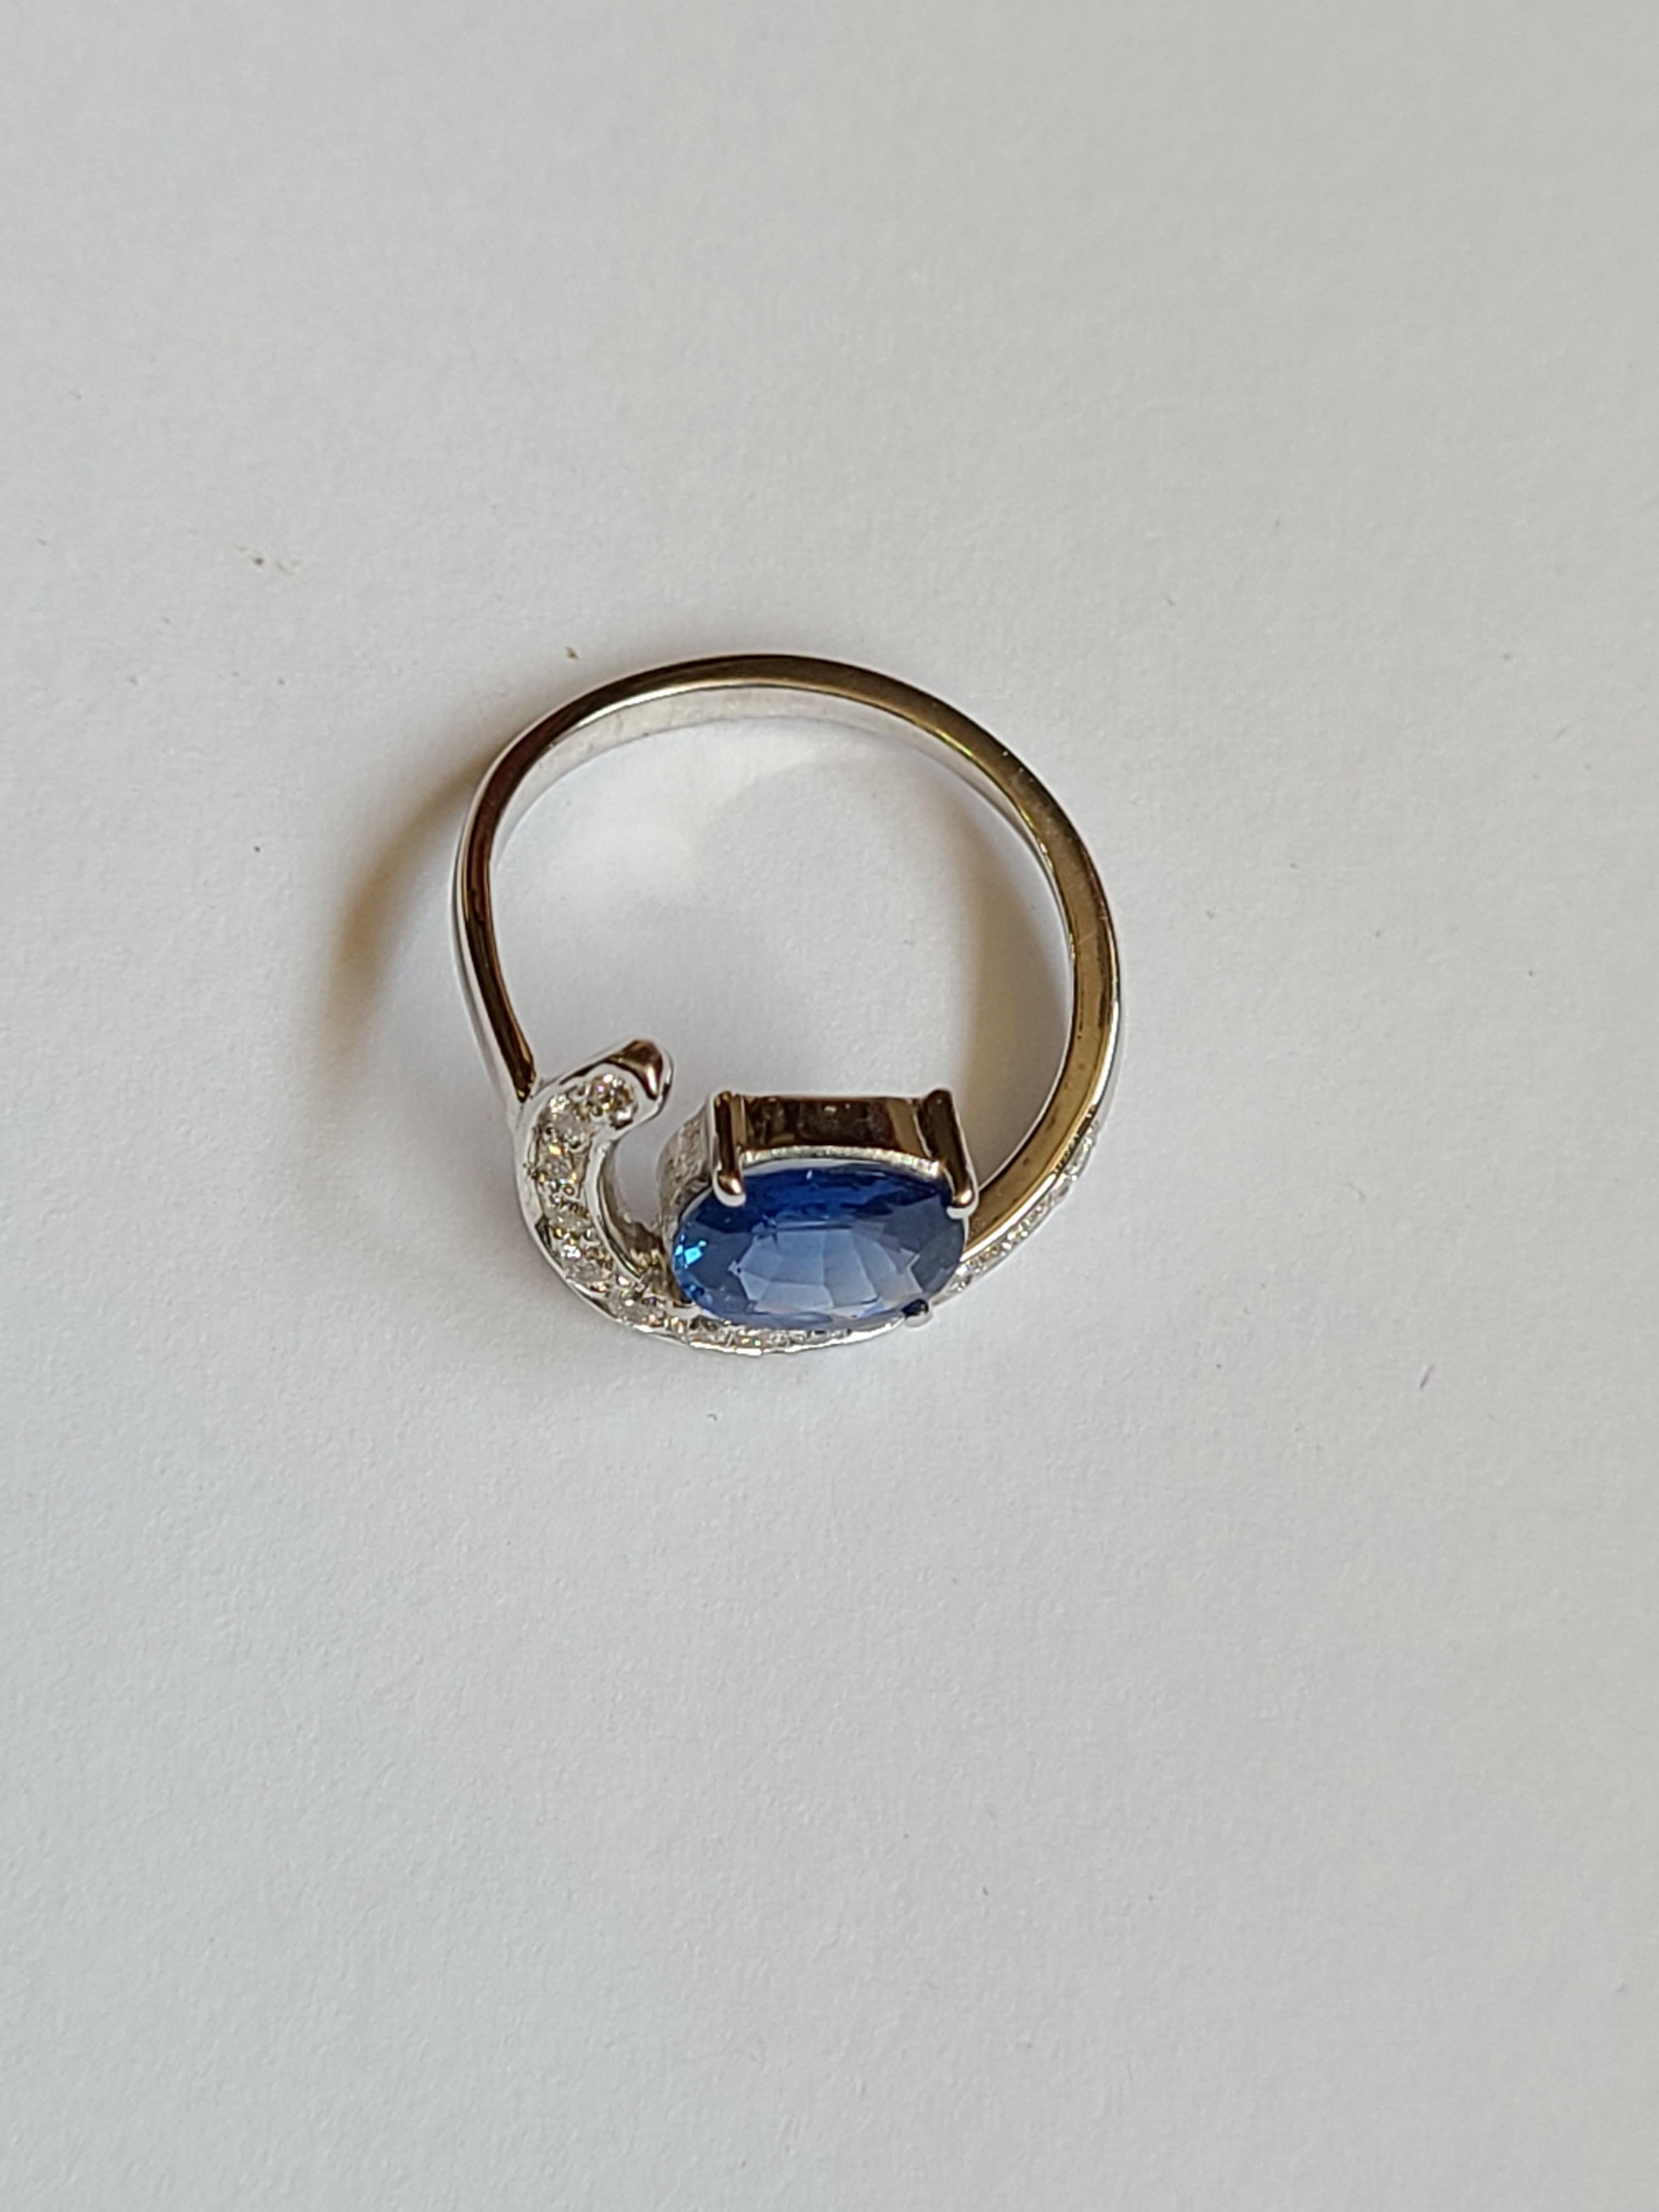 A beautiful and Chic blue sapphire ring set in 18k gold with diamonds. The blue sapphire is from sri-lanka and weight is 1.61 carats. The diamond weight is .26 carats. The ring dimensions in cm 1 x 1.8 x 2 (LXWXH). US size 5 1/2.